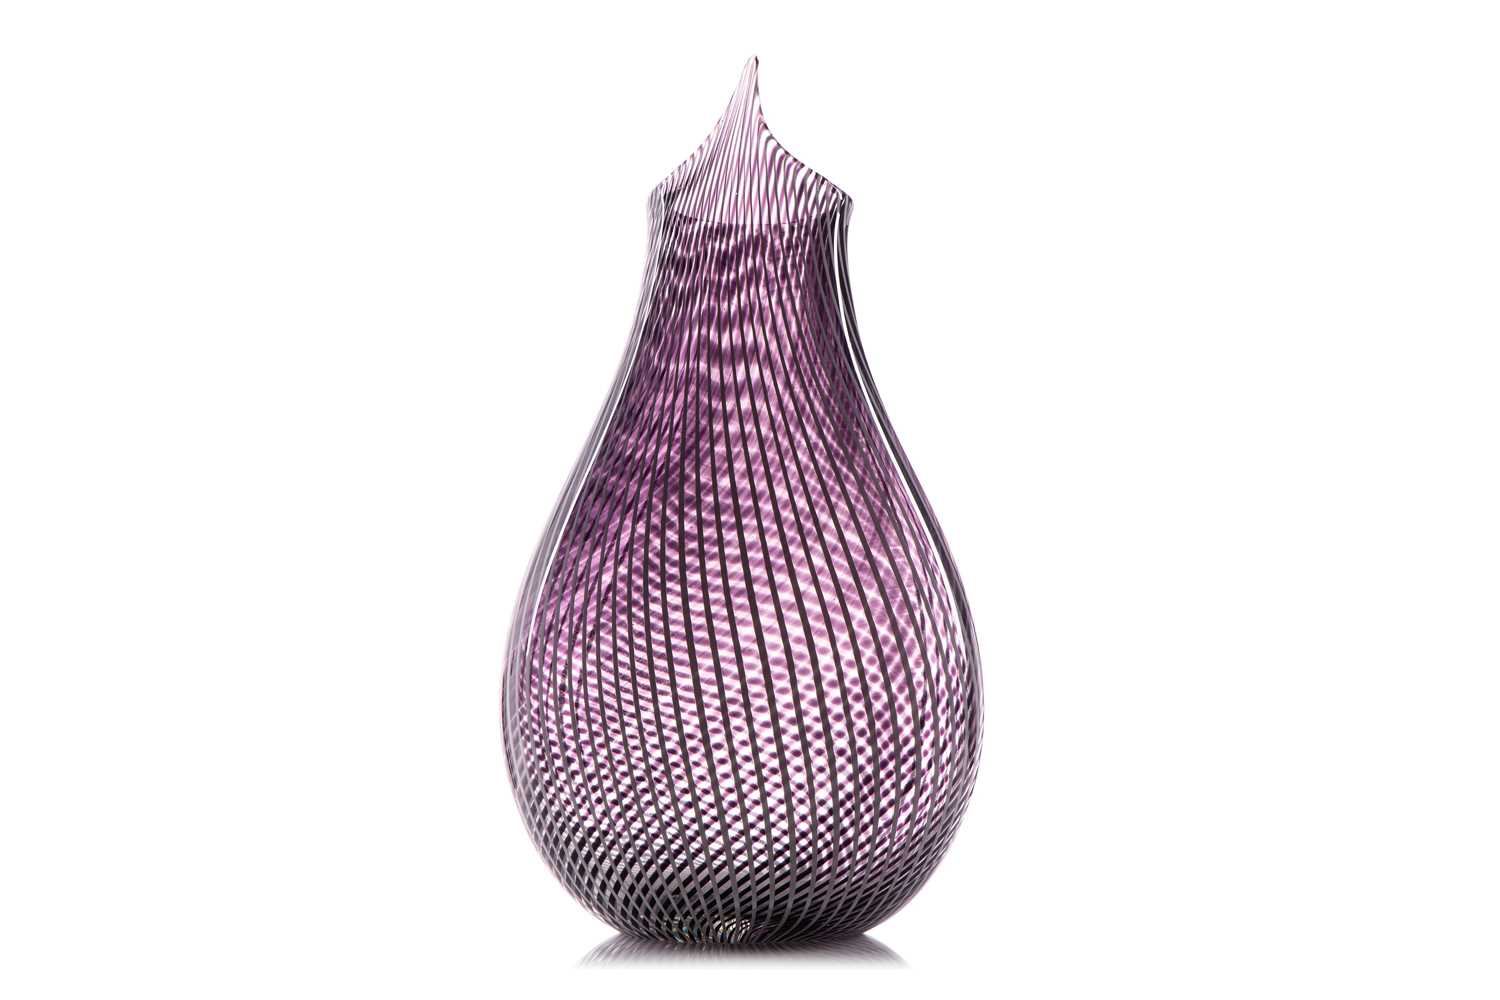 A Luca Vidal Murano large art glass vase with textured finish to one side, bespoke made for the - Image 3 of 9